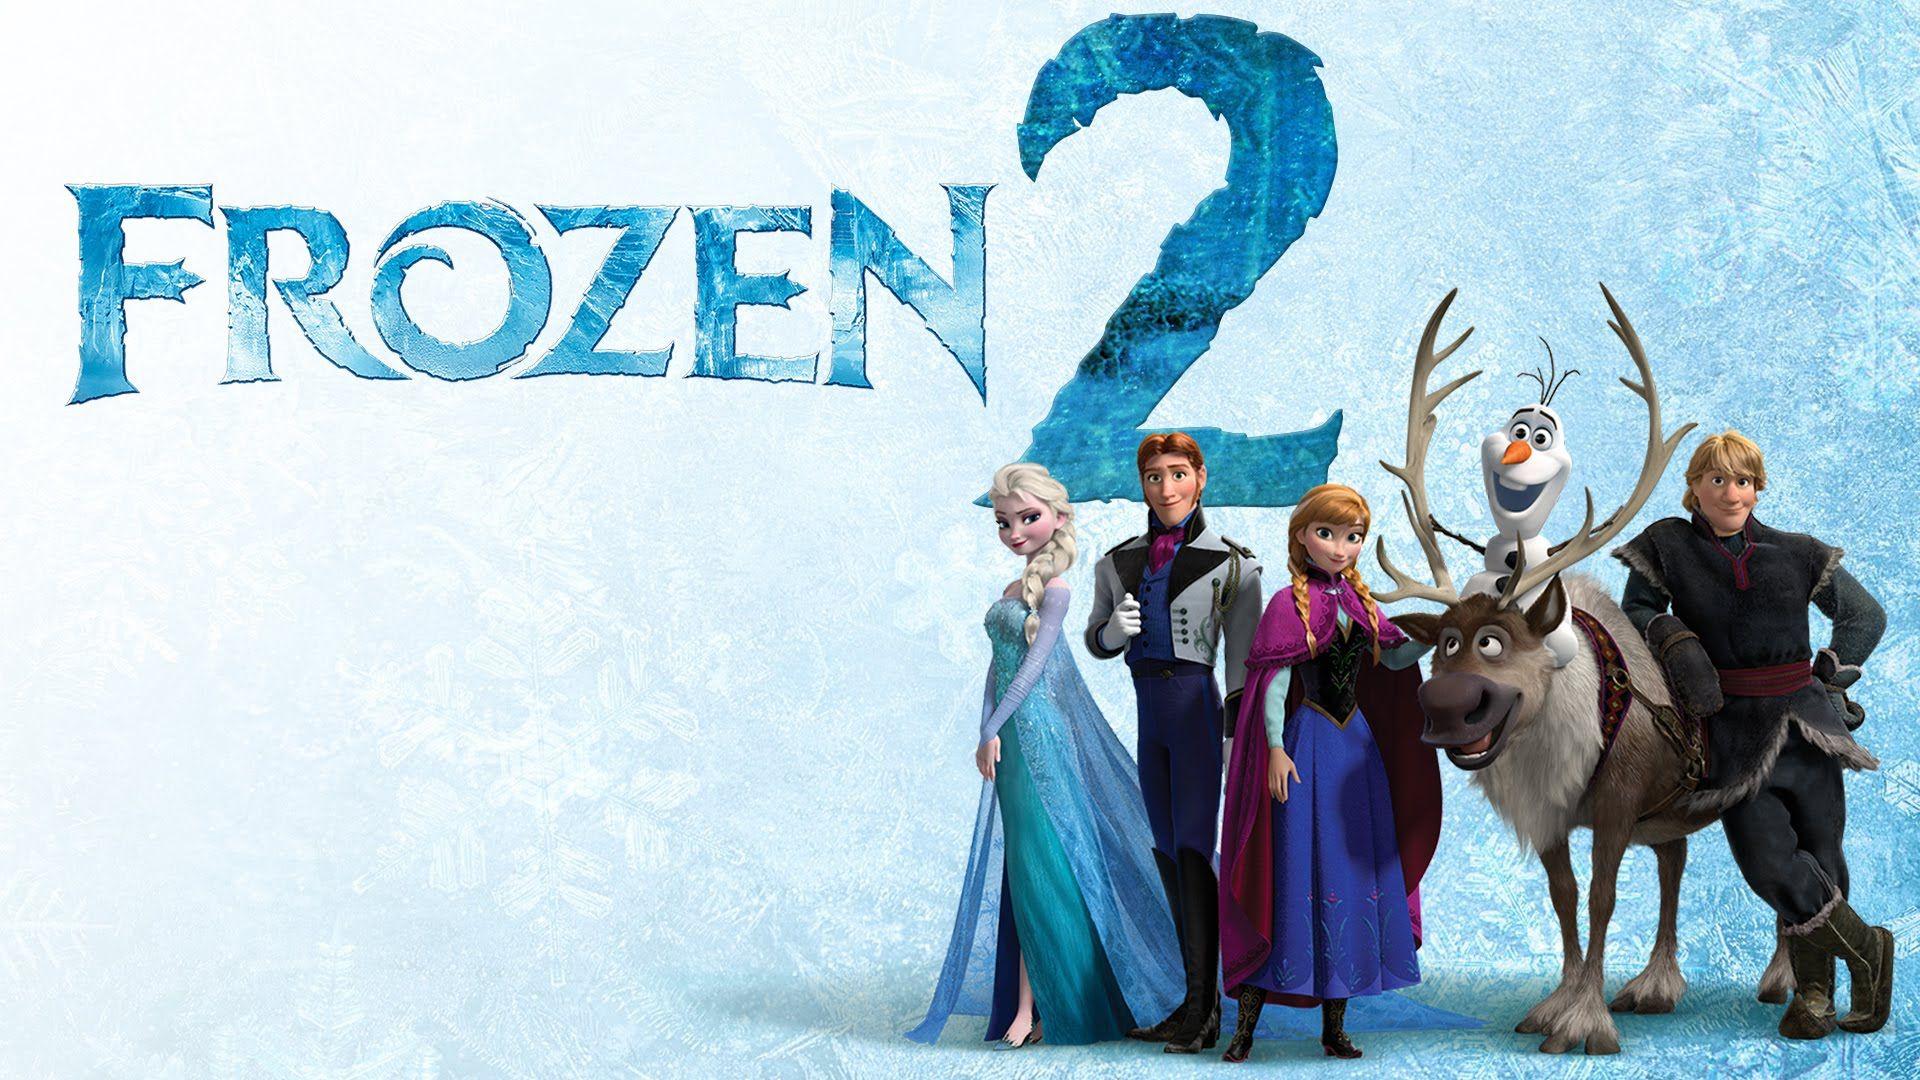 Frozen 2 Poster 2019 Image Wallpapers